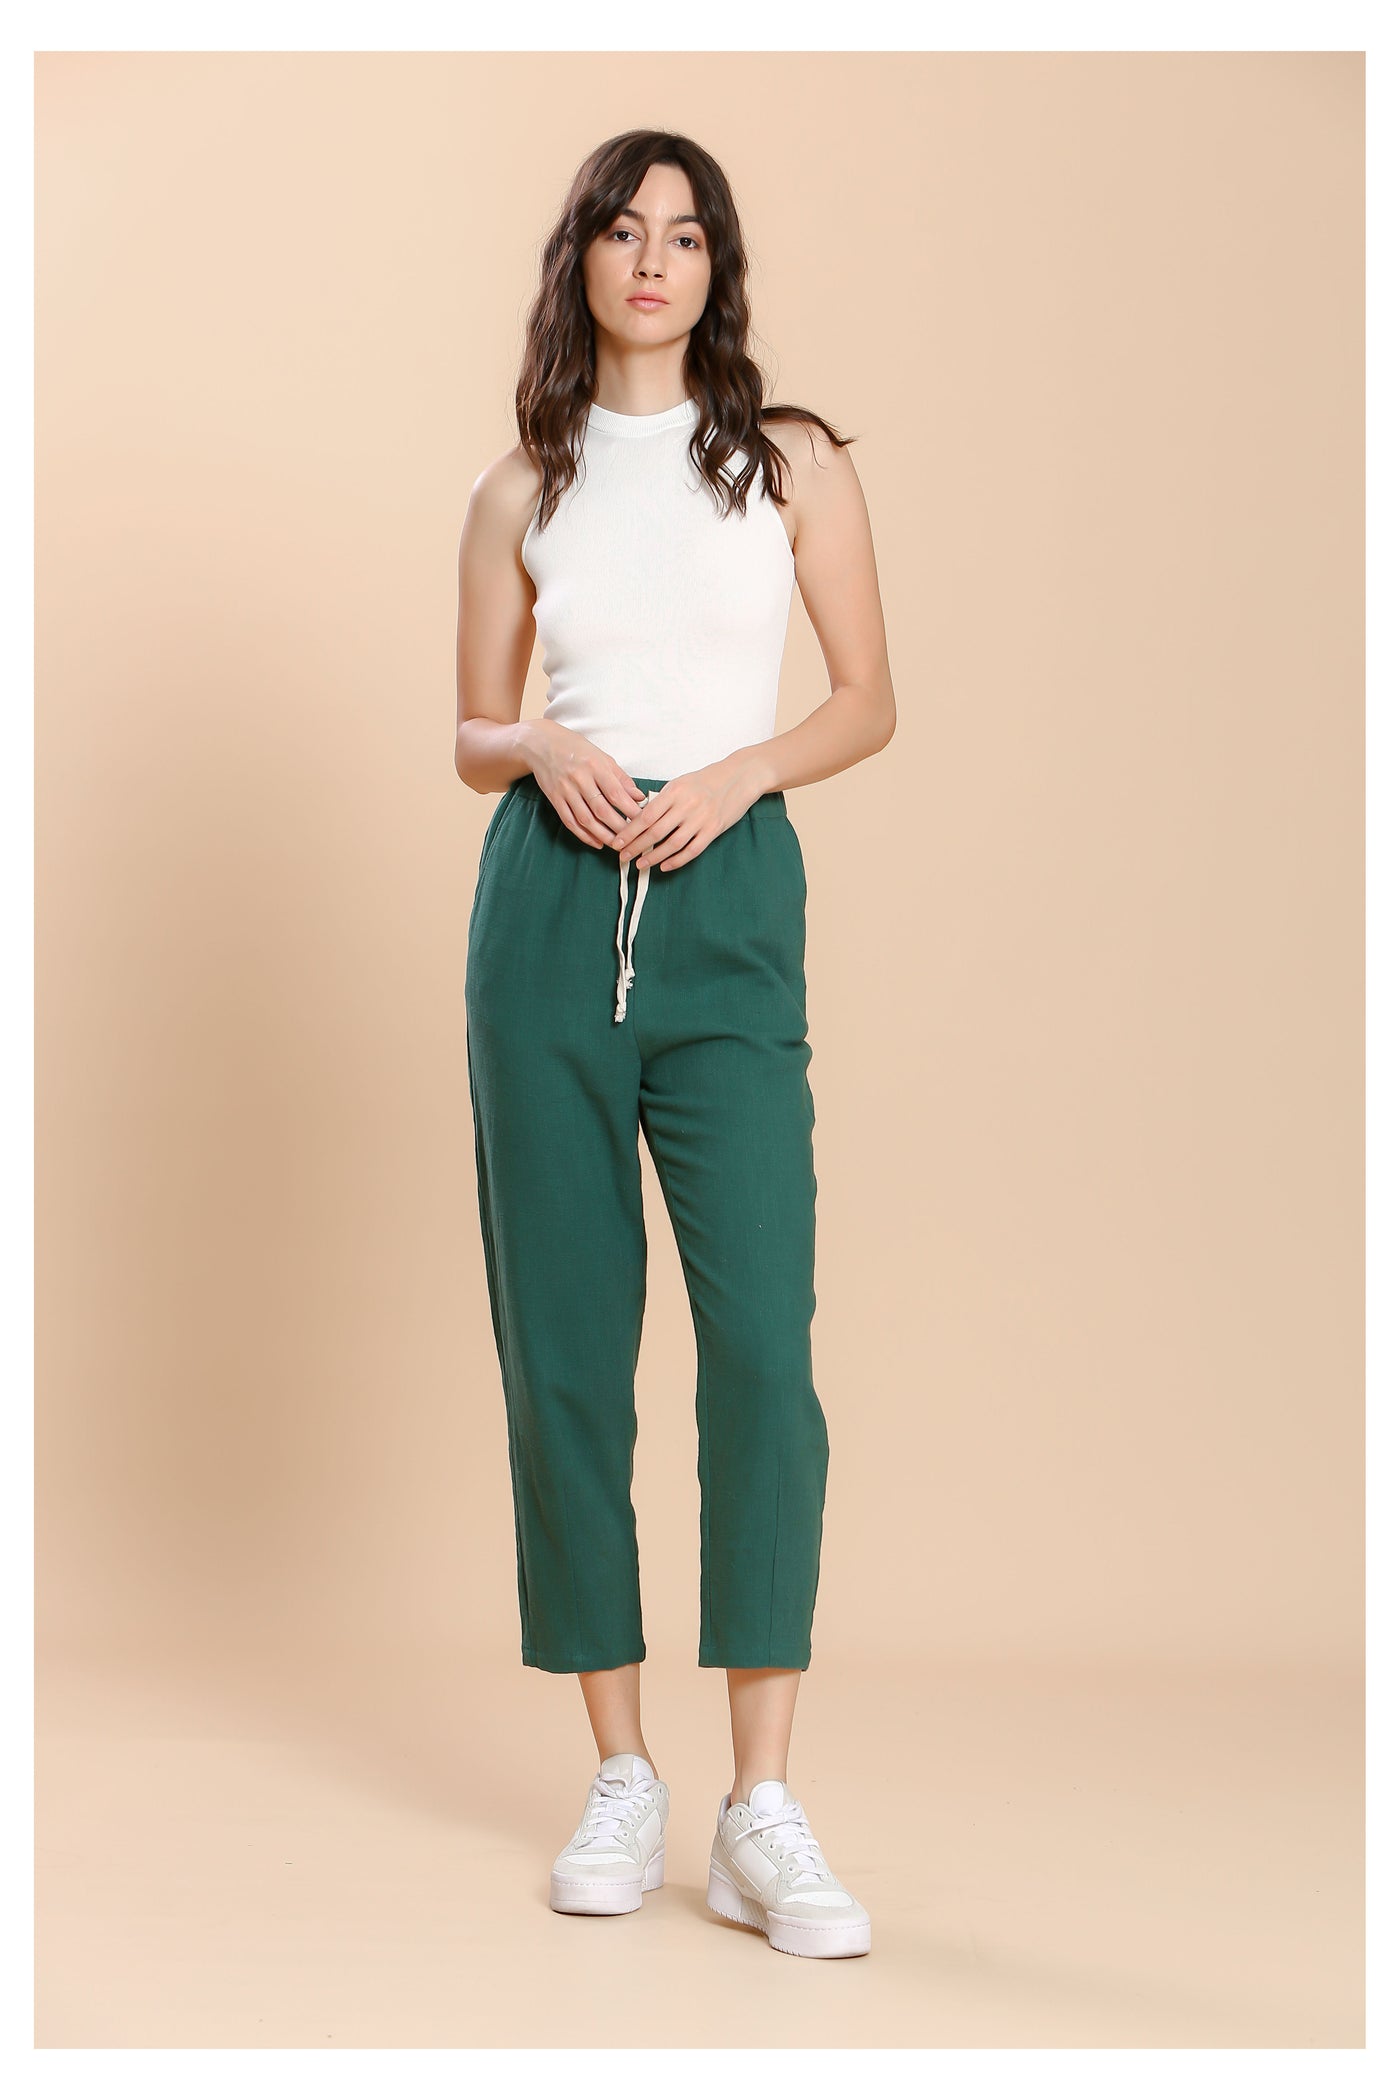 JACOB PANT - beige or green